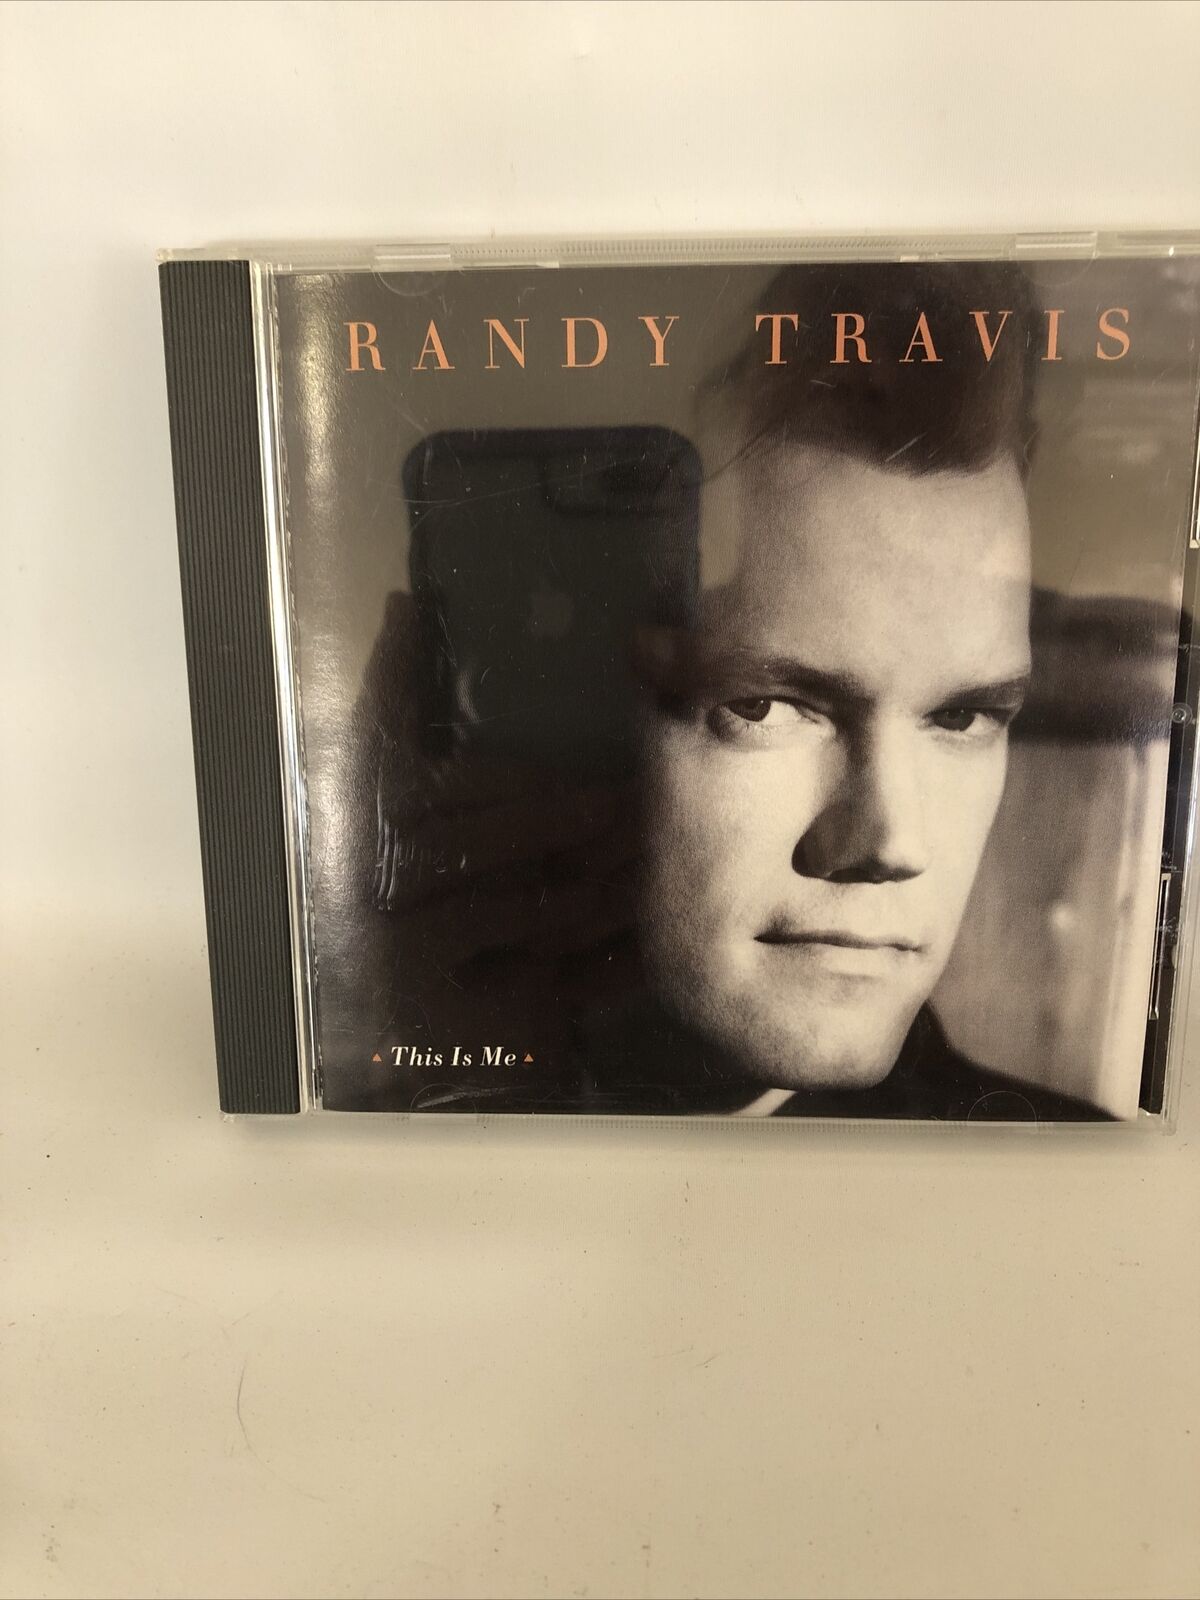 Randy Travis - This Is Me (CD, 1994, Warner Bros.) Country shiny disc. no marks